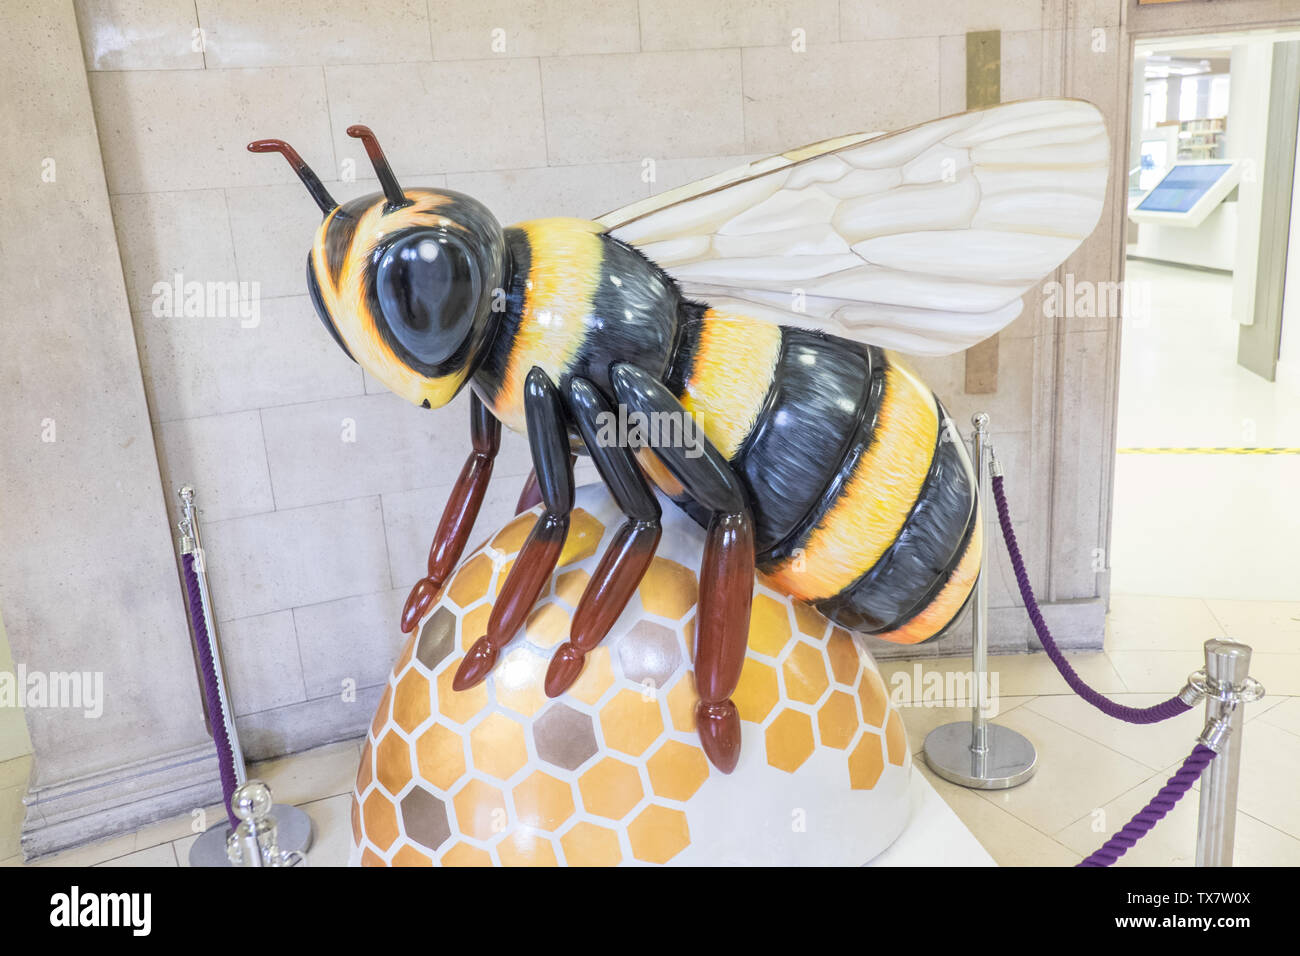 Manchester Bee,Bee,Central Library,Manchester Central Library,Manchester,north,northern,north west,city,England,English,GB,UK,Britain,British,Europe, Stock Photo